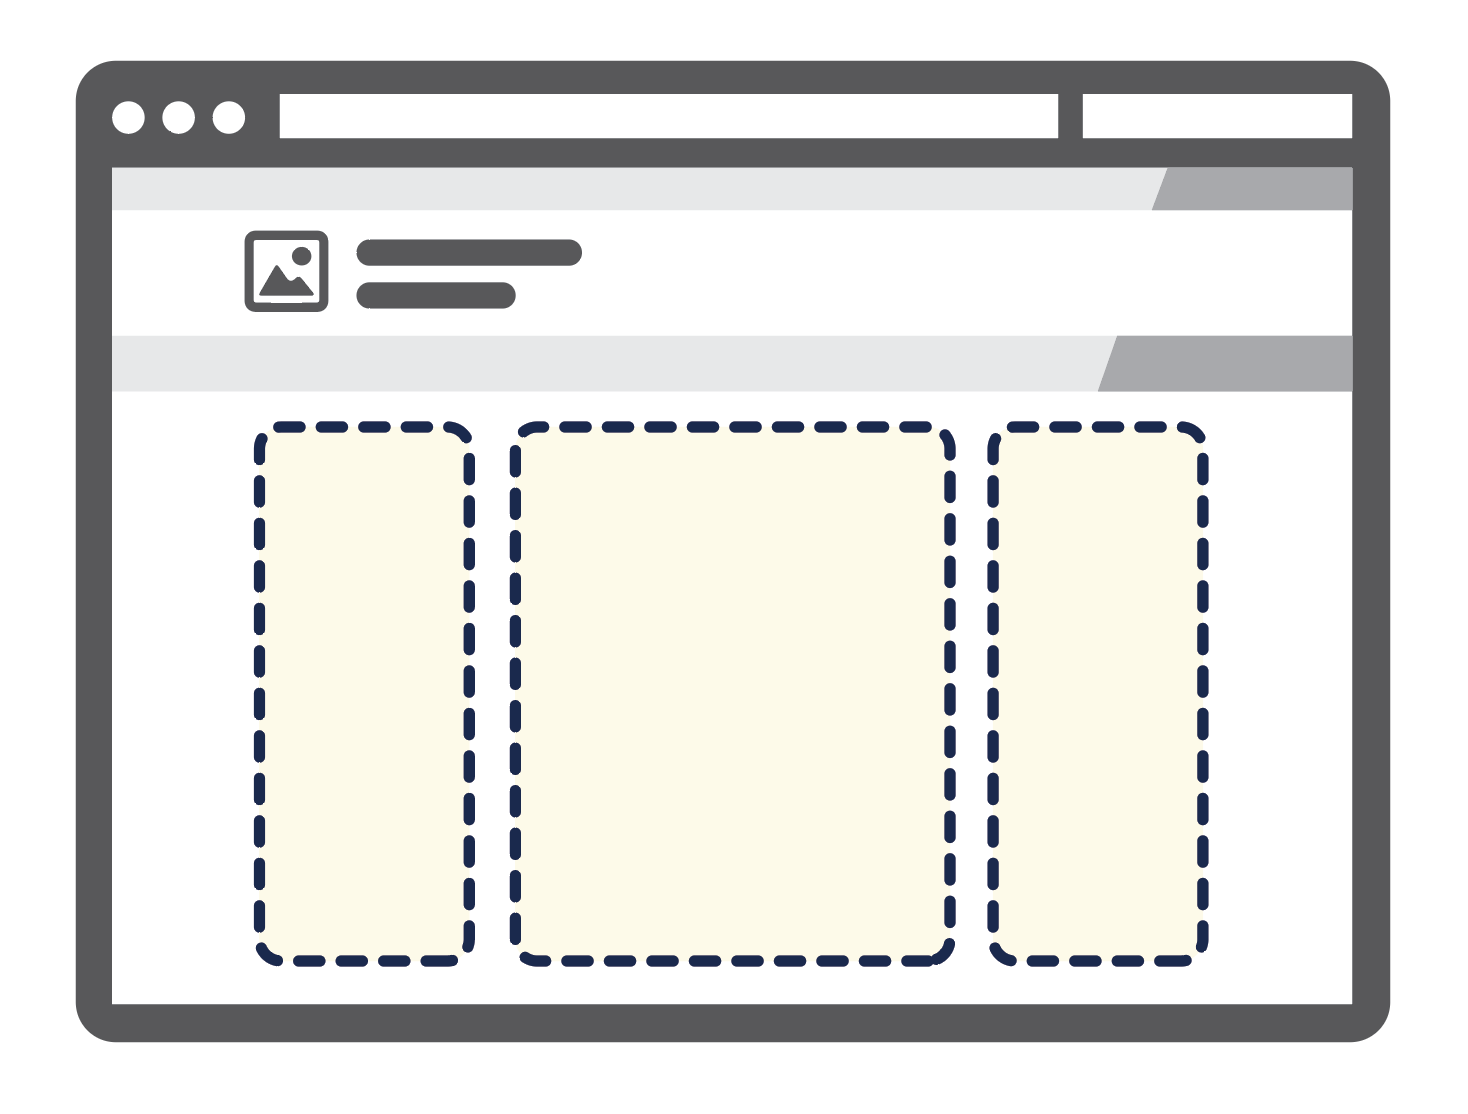 An illustration showing the basic default page layout using Main Content and First and Second sidebar regions.